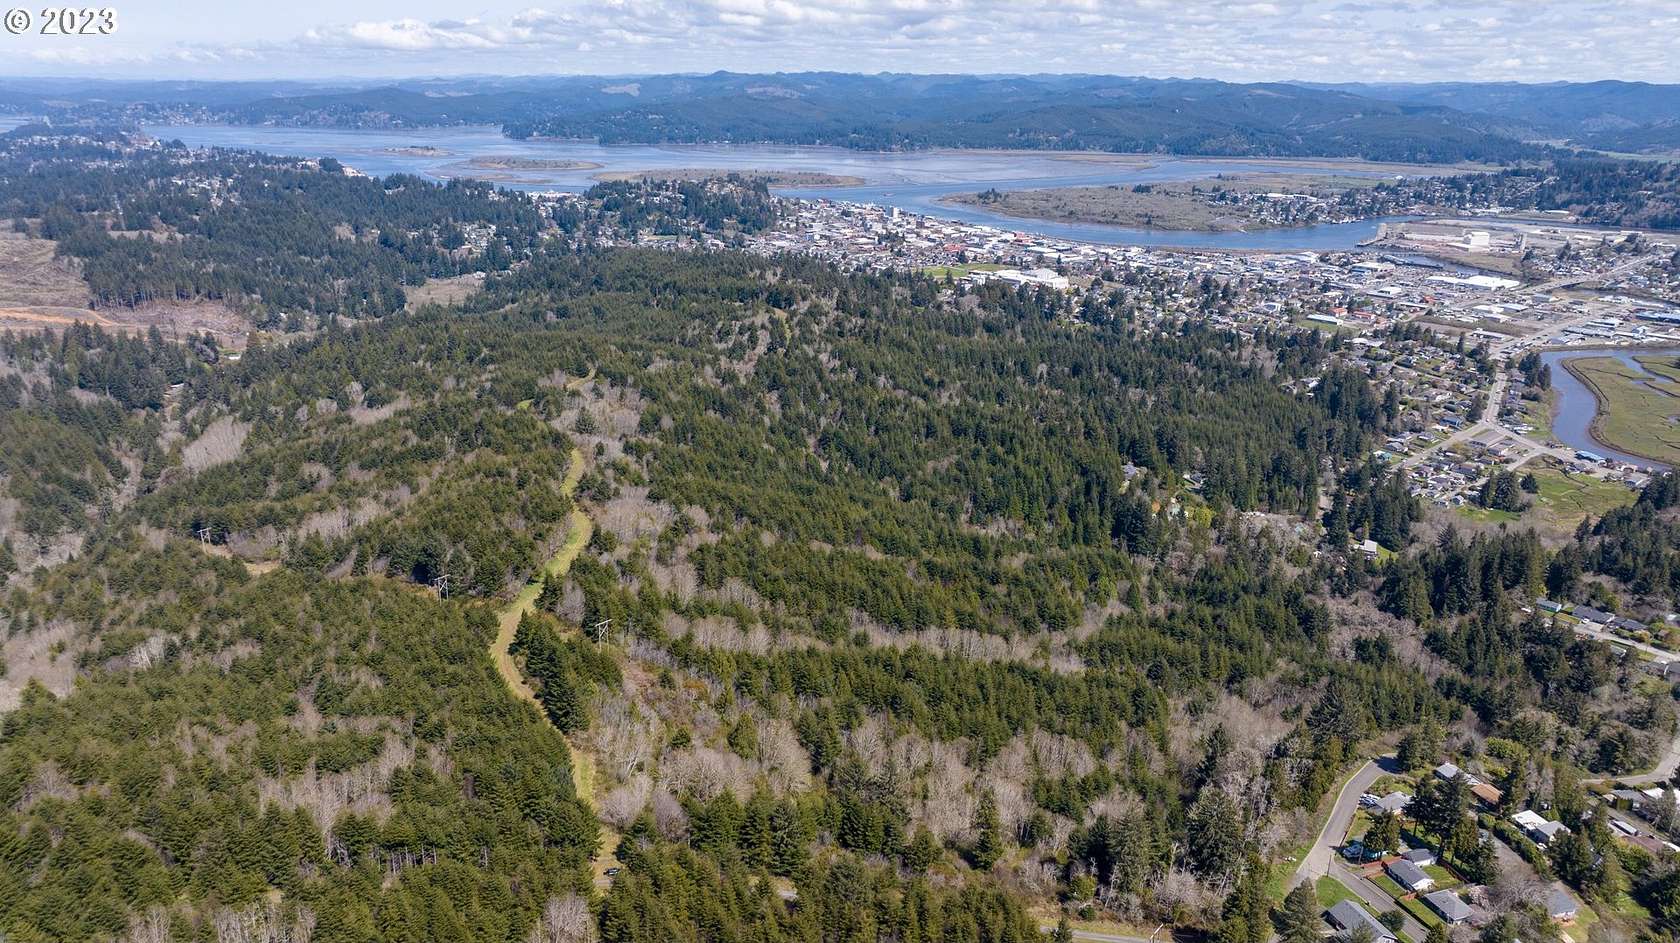 192 Acres of Mixed-Use Land for Sale in Coos Bay, Oregon